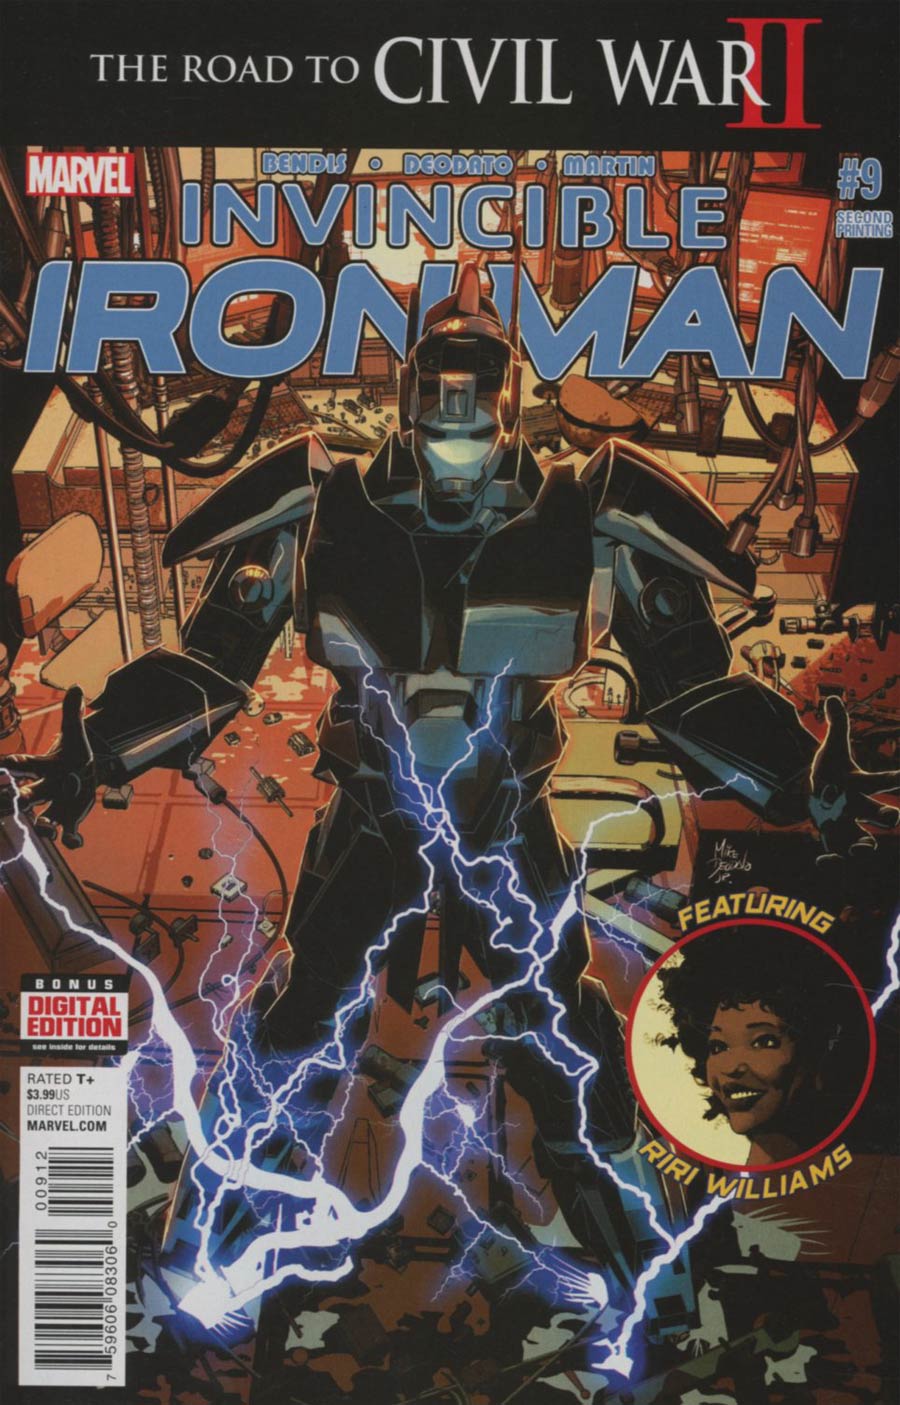 Invincible Iron Man Vol 2 #9 Cover C 2nd Ptg Mike Deodato Variant Cover (Road To Civil War II Tie-In)